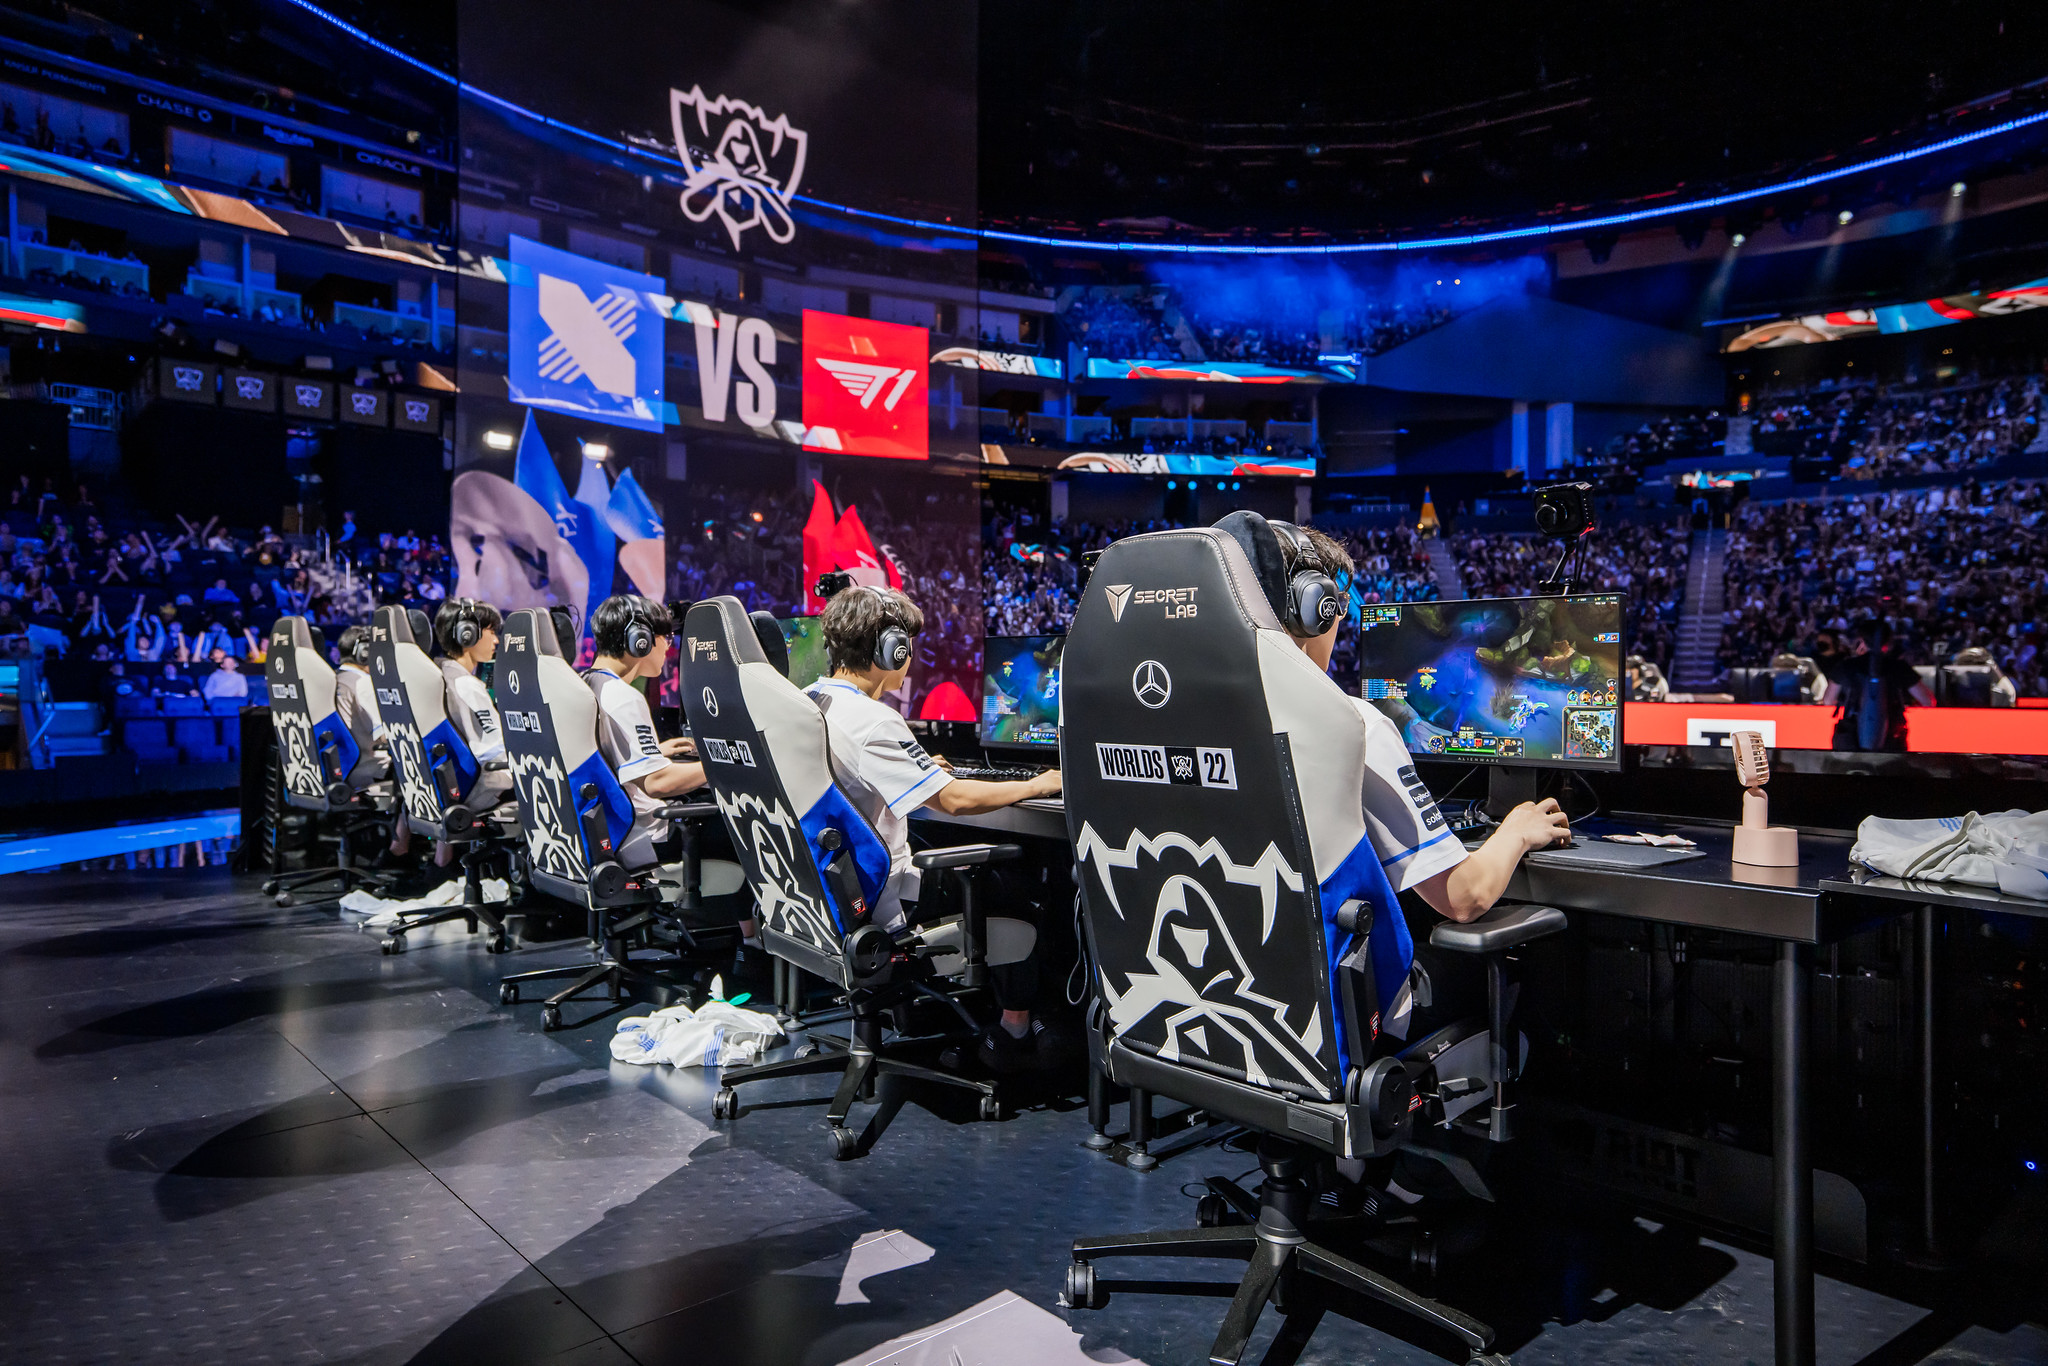 SAN FRANCISCO, CALIFORNIA - NOVEMBER 05: DRX competes at the League of Legends World Championship Finals on November 5, 2022 in San Francisco, CA. (Photo by Lance Skundrich/Riot Games)